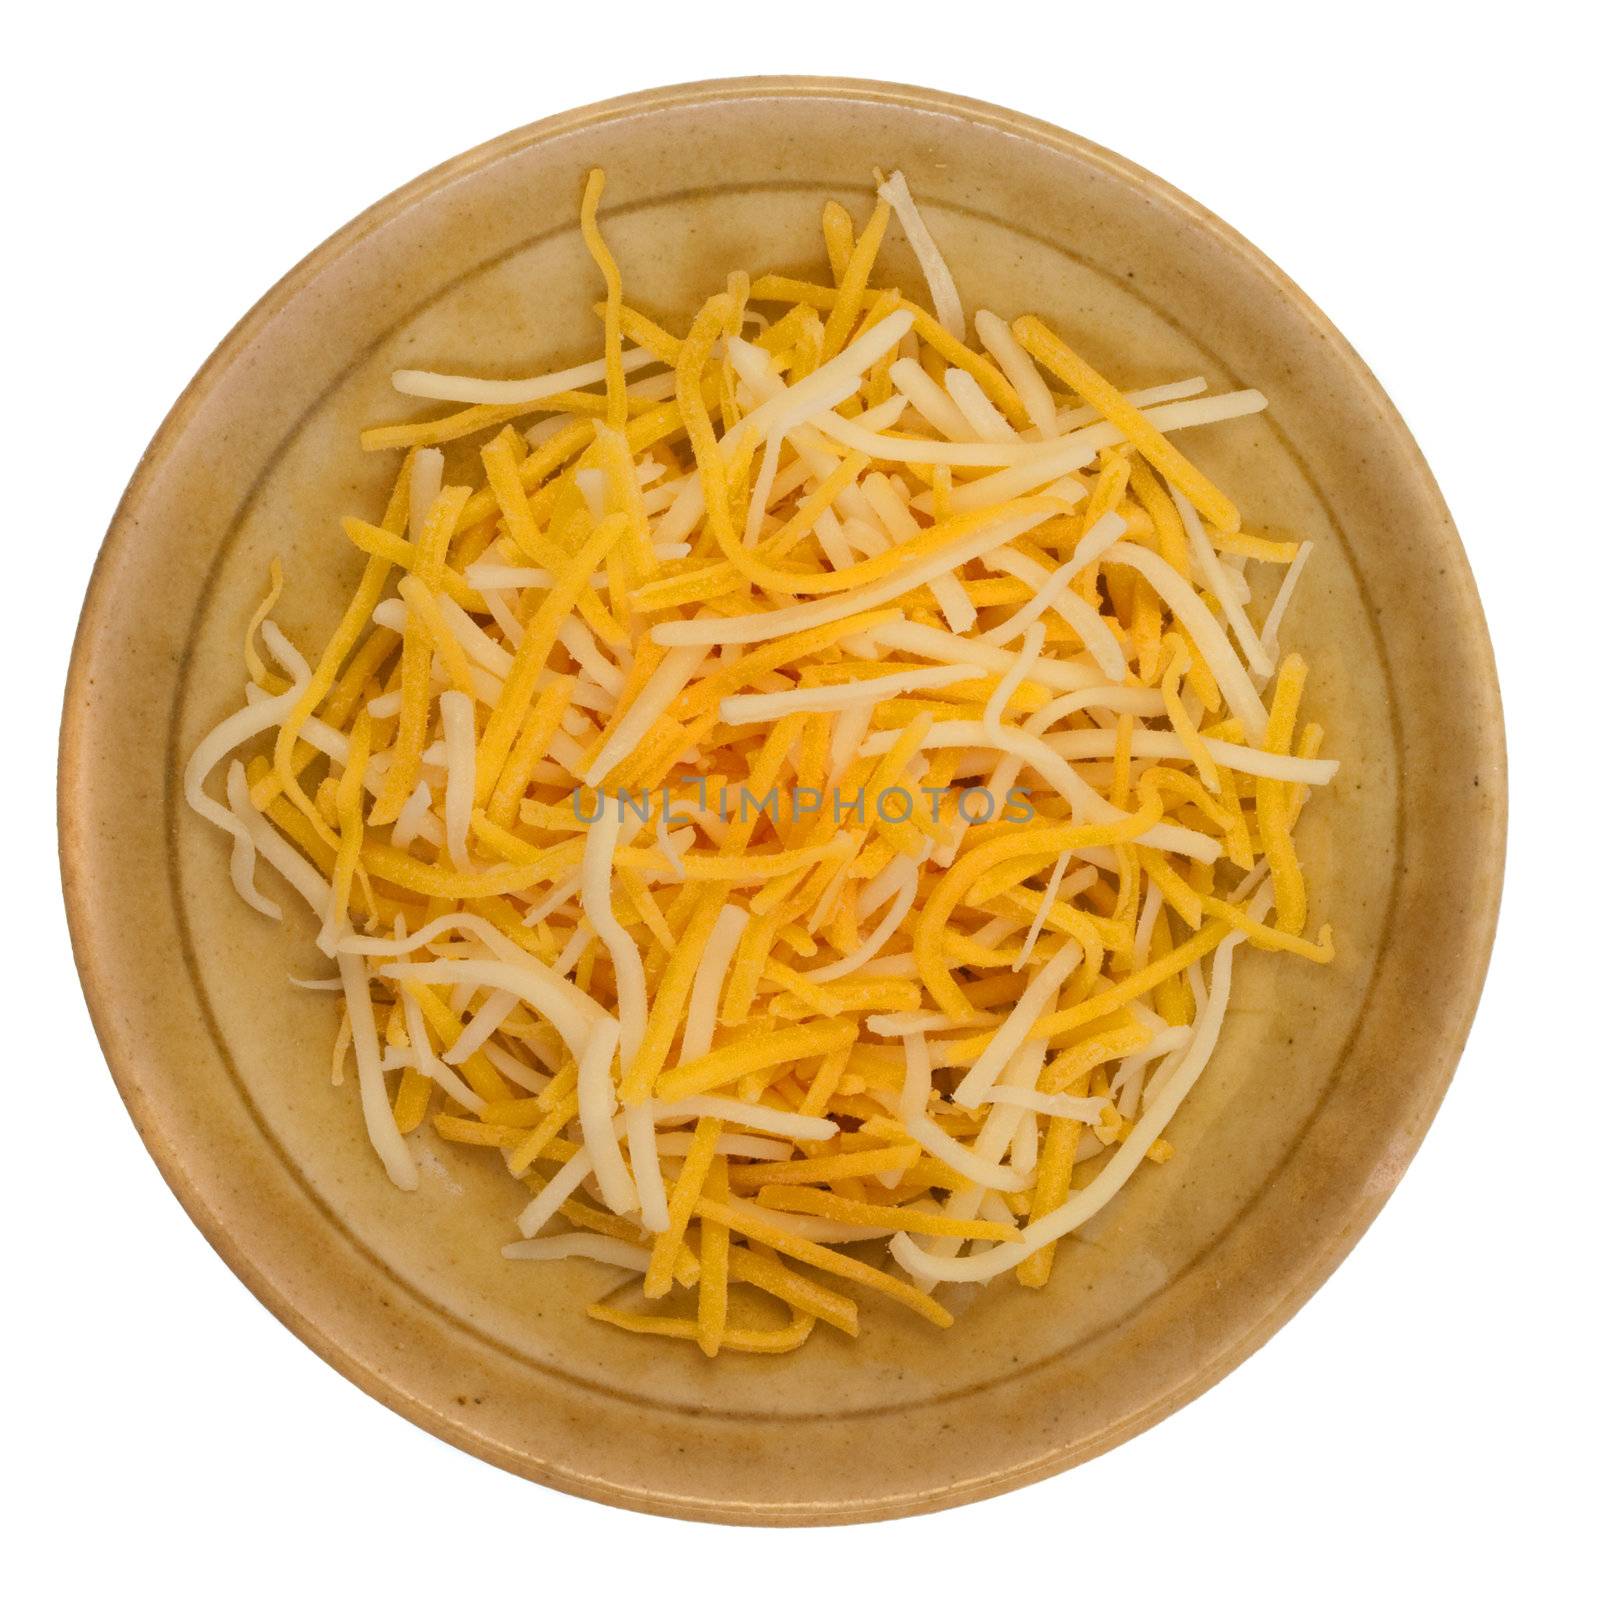 shredded cheddar and Monterey Jack cheese on a small ceramic bowl isolated against white background